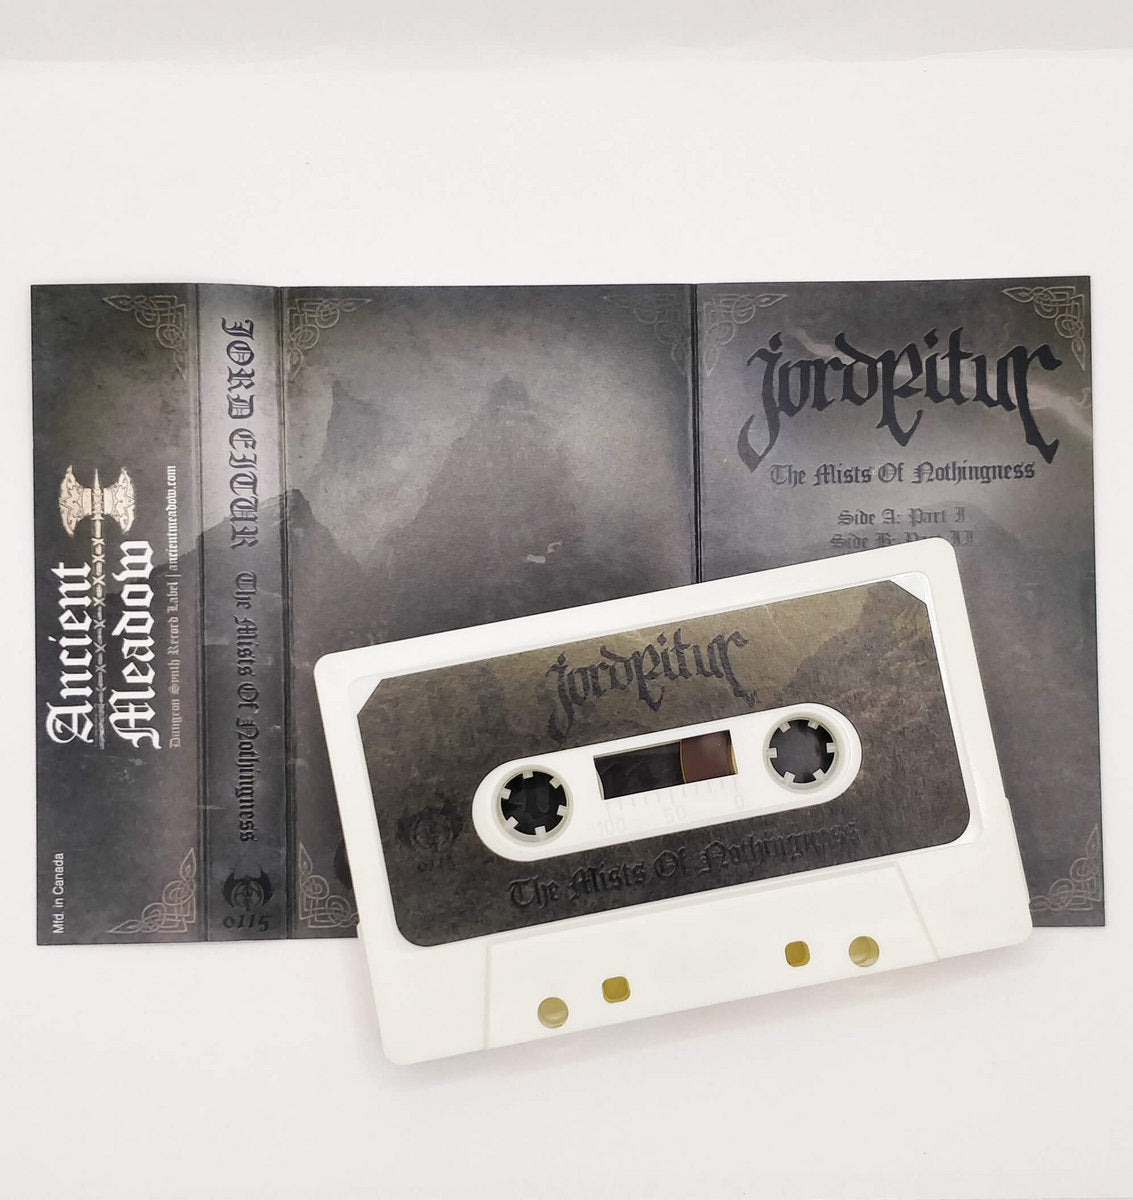 JORD EITUR "The Mists of Nothingness" Cassette Tape